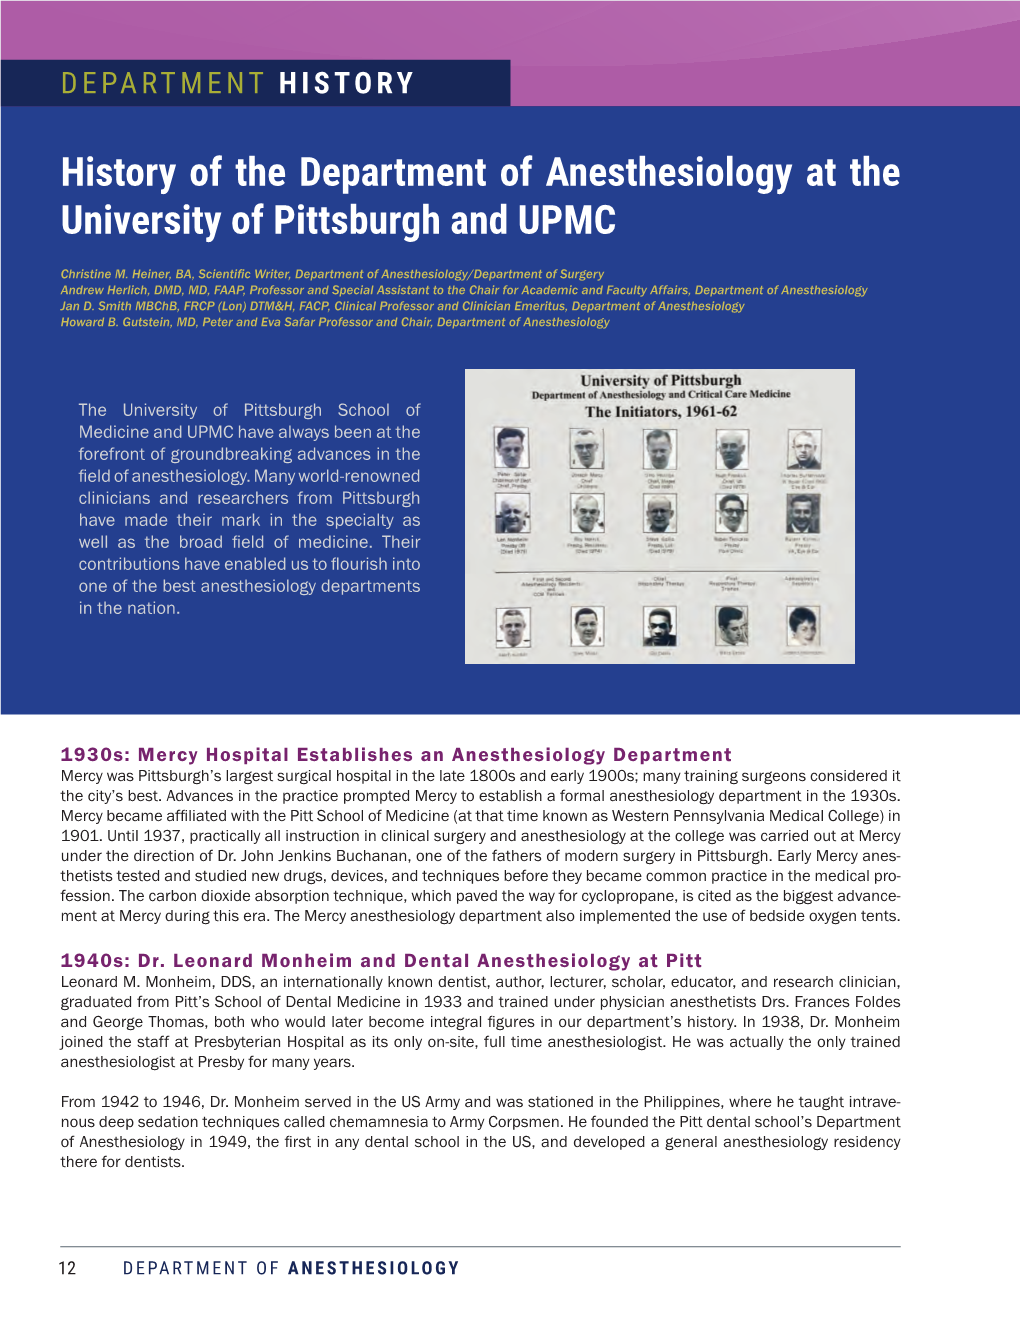 History of the Department of Anesthesiology at the University of Pittsburgh and UPMC